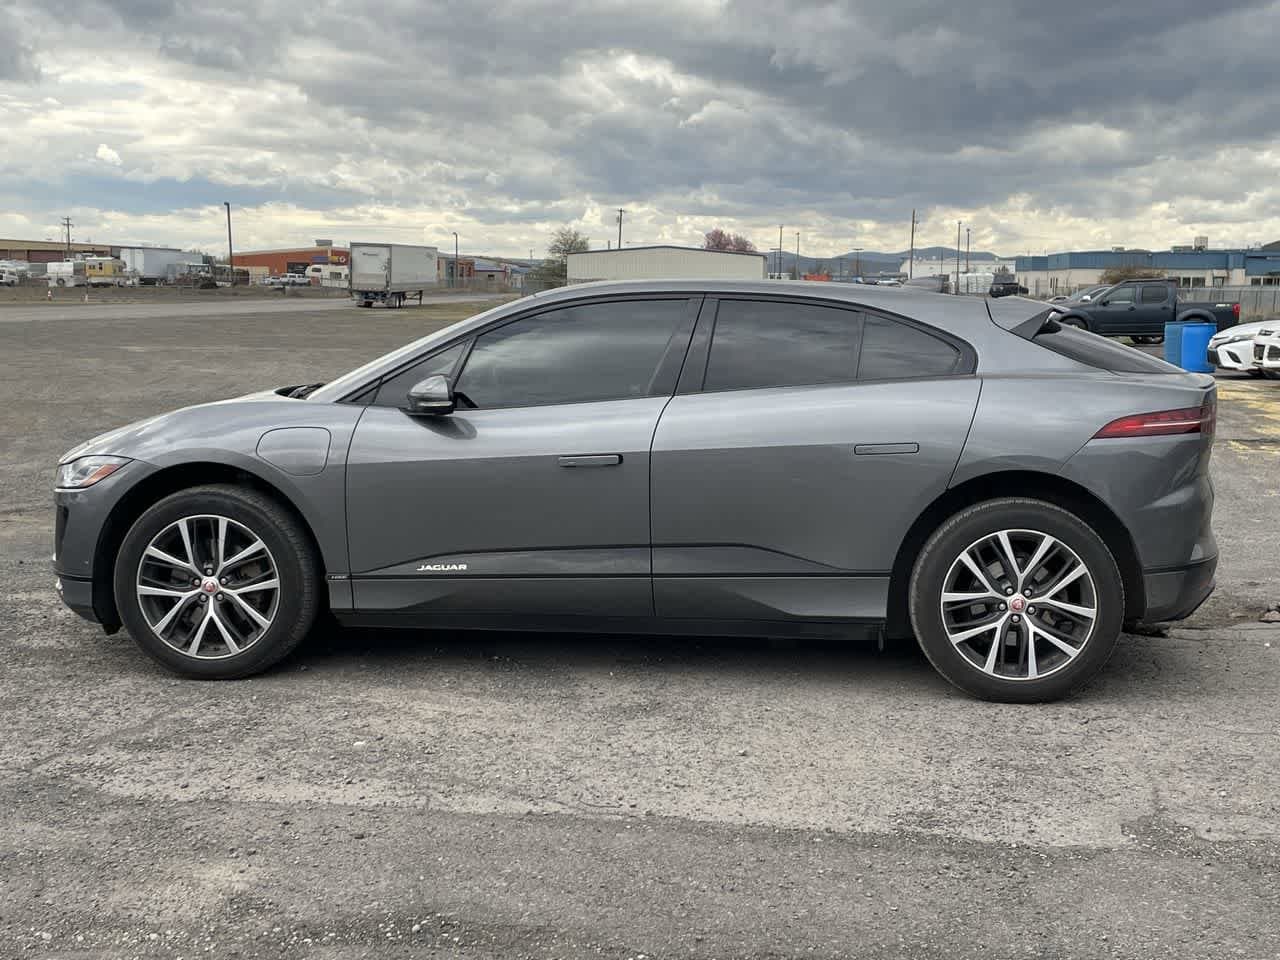 Used 2019 Jaguar I-PACE First Edition with VIN SADHD2S17K1F64208 for sale in Klamath Falls, OR